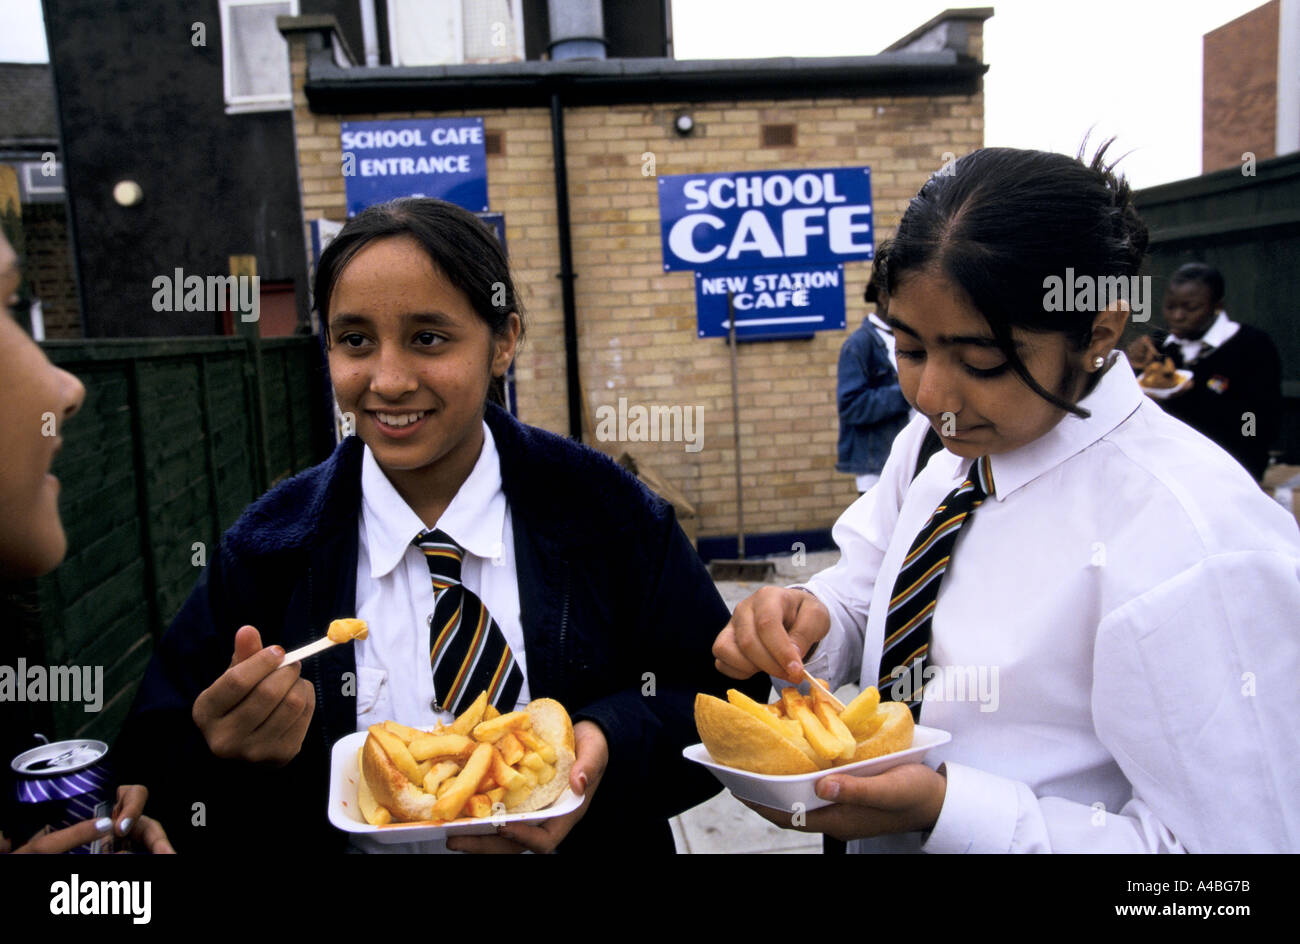 FOREST GATE, LONDON FOREST GATE COMPREHENSIVE SCHOOL, CHILDREN EATING AT A CHIP SHOP NEARBY THAT CALLS ITSELF 'SCHOOL CAFE', Stock Photo